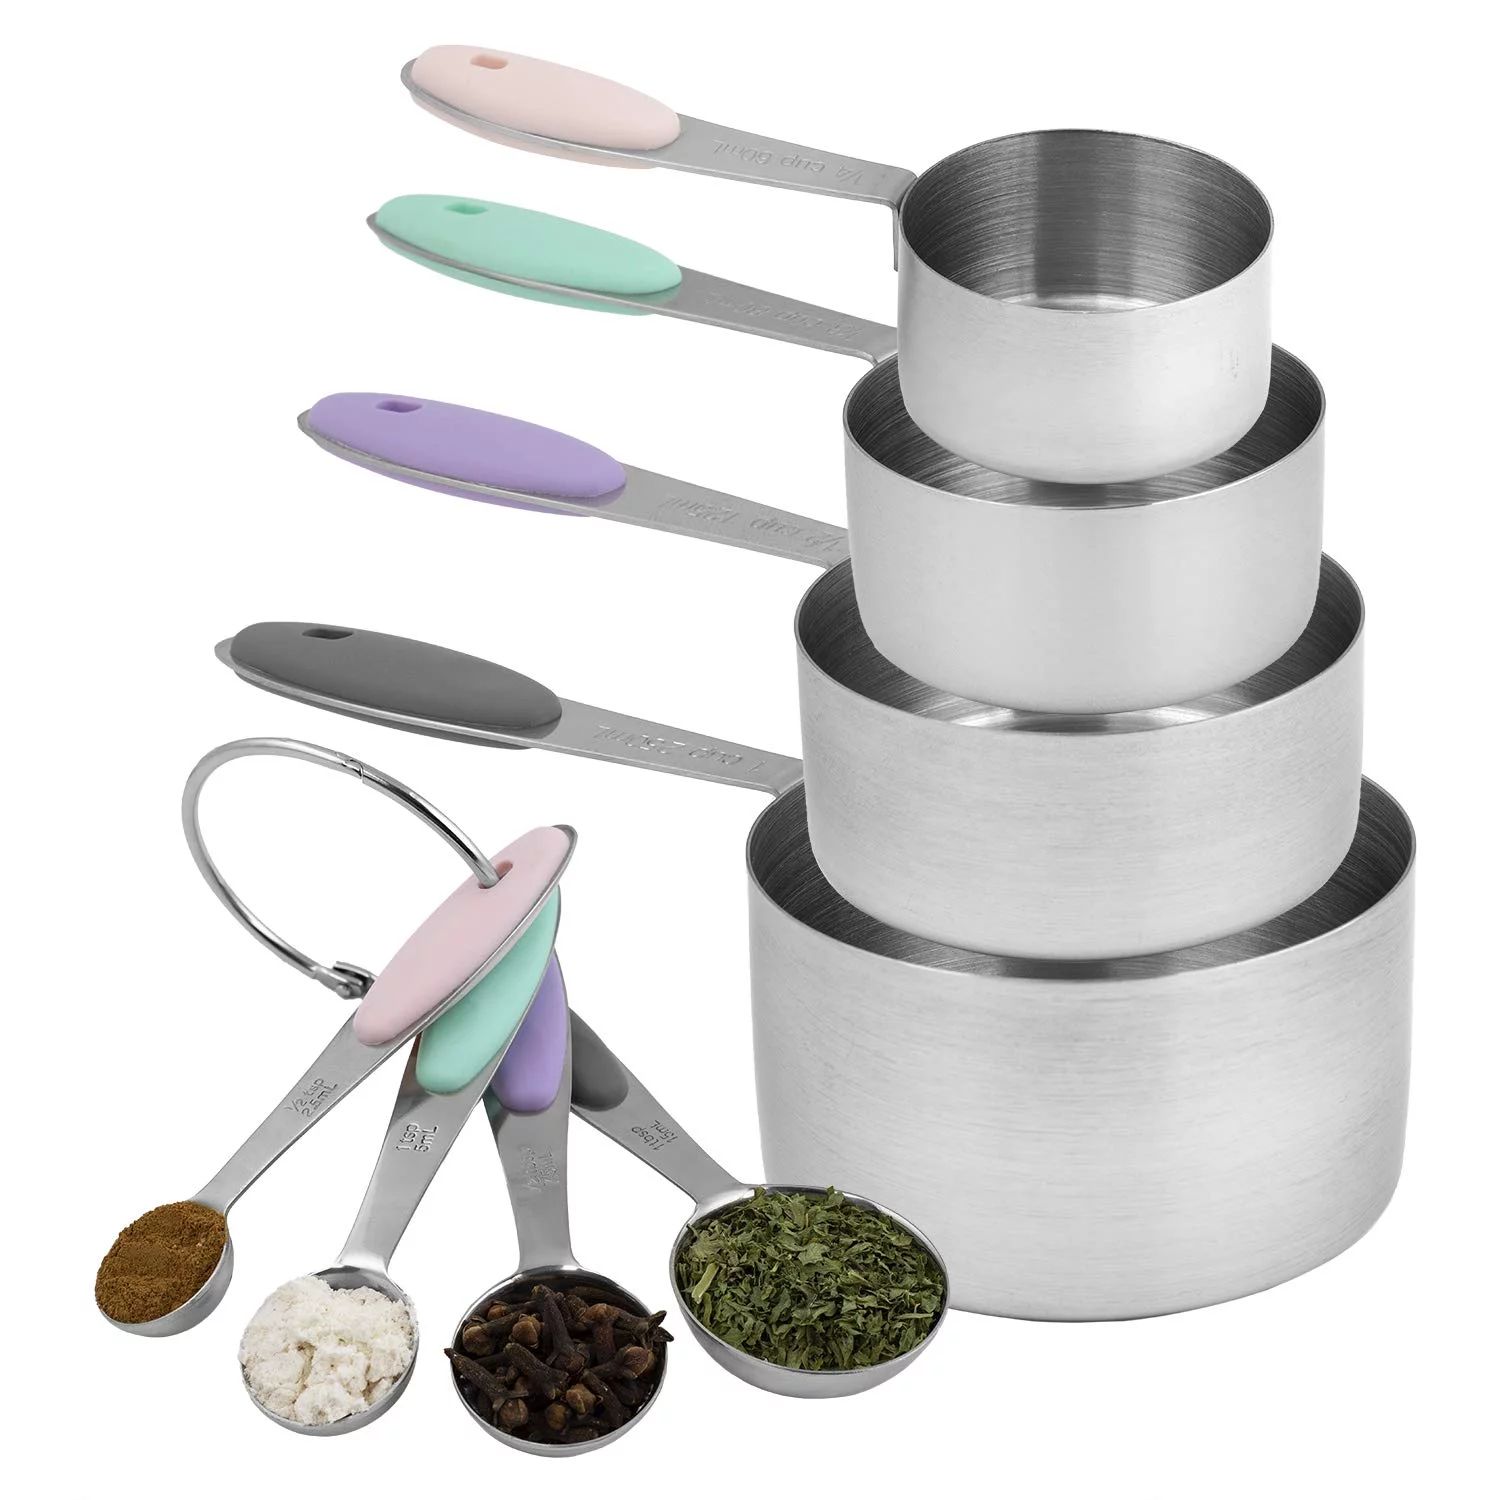 Cook with Color Stainless Steel Measuring Cups and Measuring Spoon 8 Piece Set, Multicolored | Walmart (US)